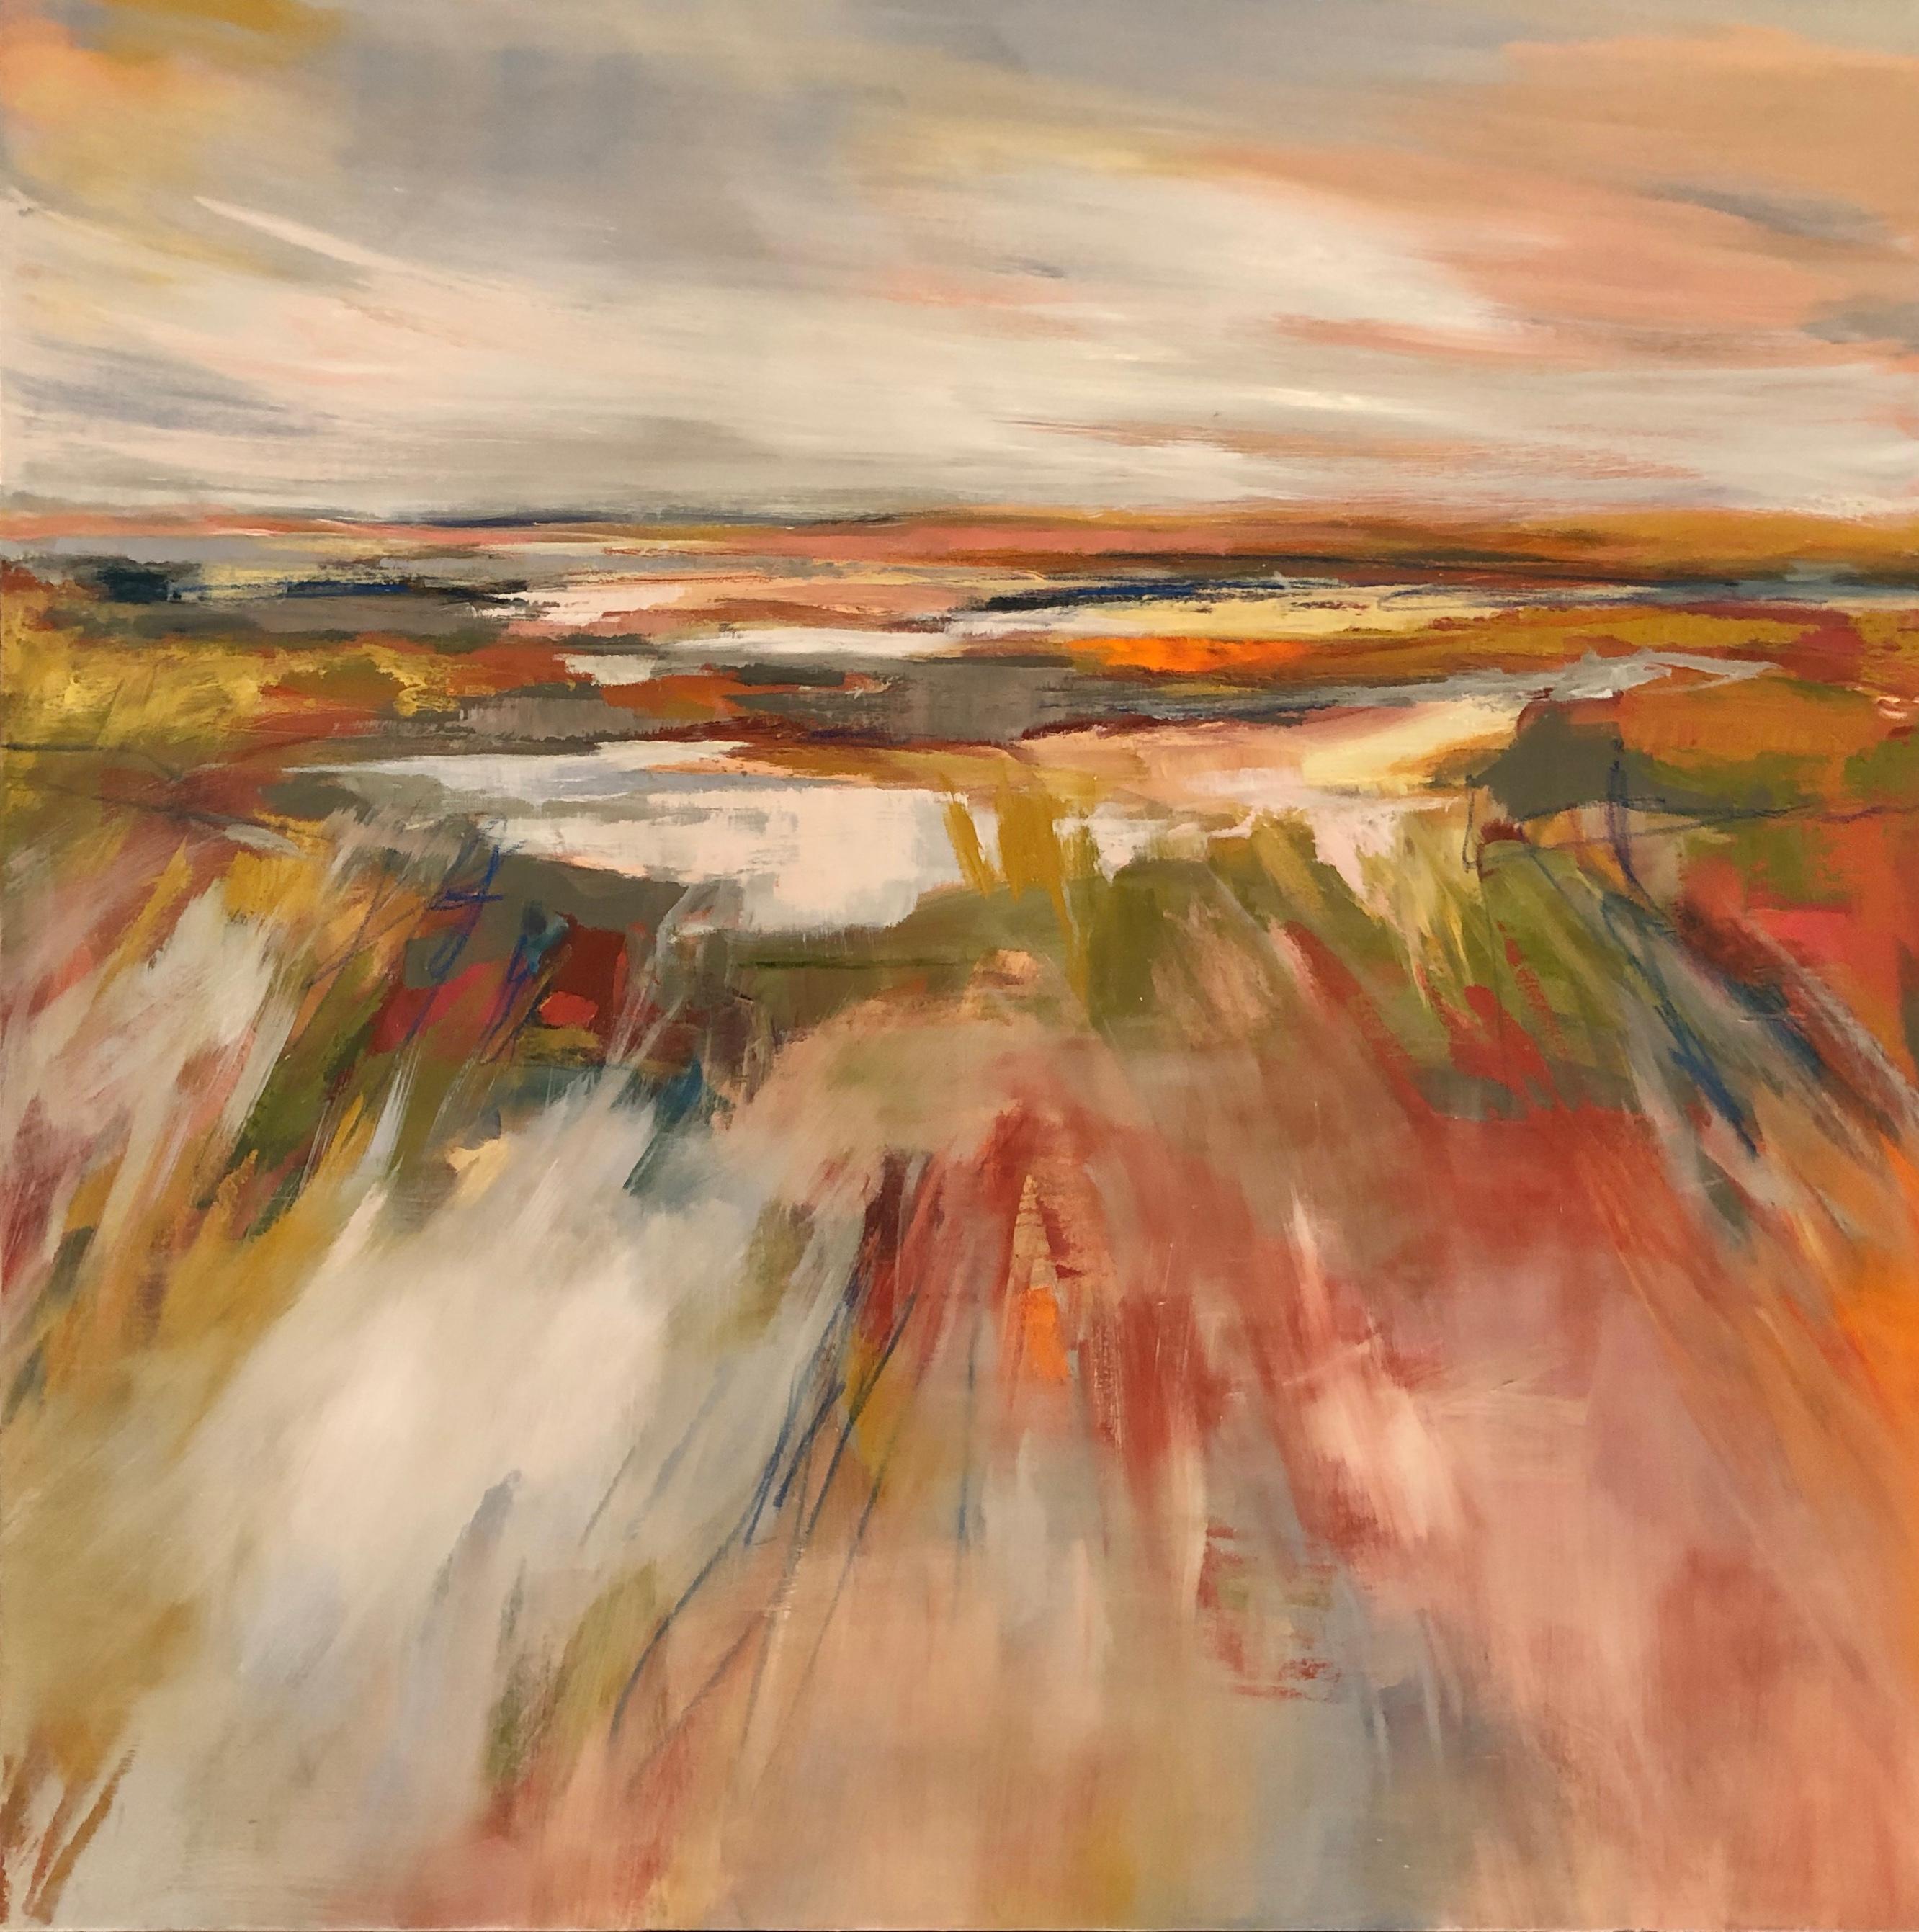 'Wetland Splendor' is a large framed oil and wax on canvas abstracted landscape created by American artist Kelli Kaufman in 2019. Featuring a palette mostly made of warm tonalities, this square format piece depicts a marsh on the Gulf Coast. The